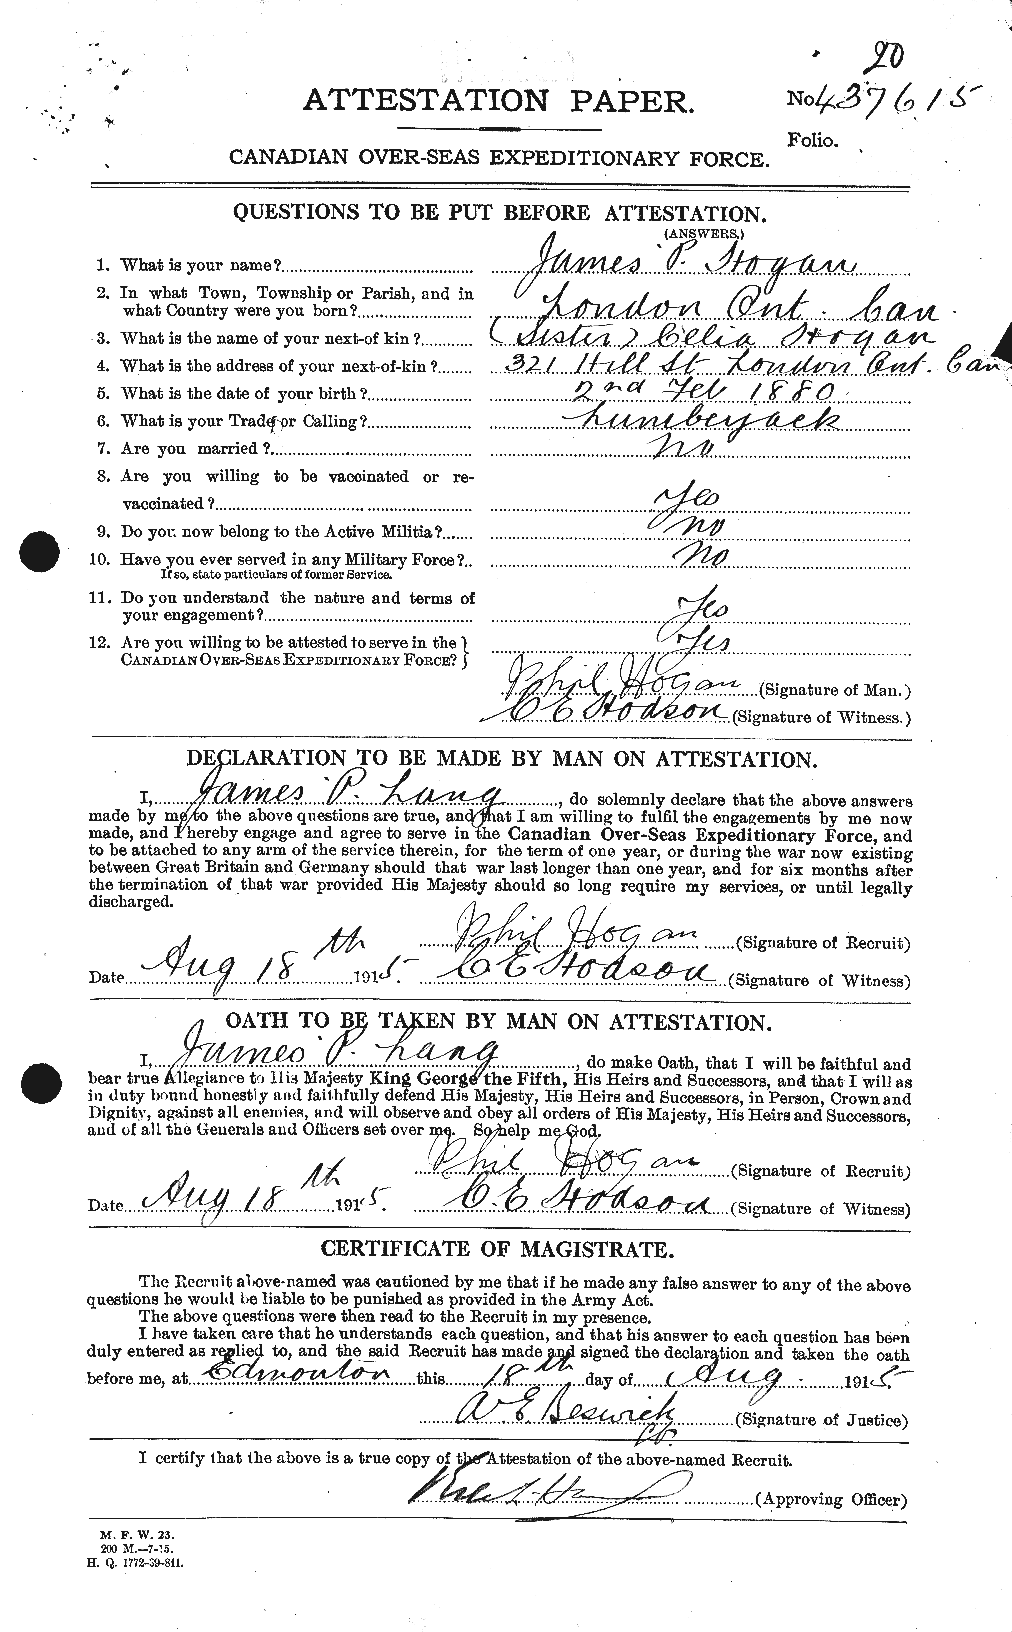 Personnel Records of the First World War - CEF 397068a